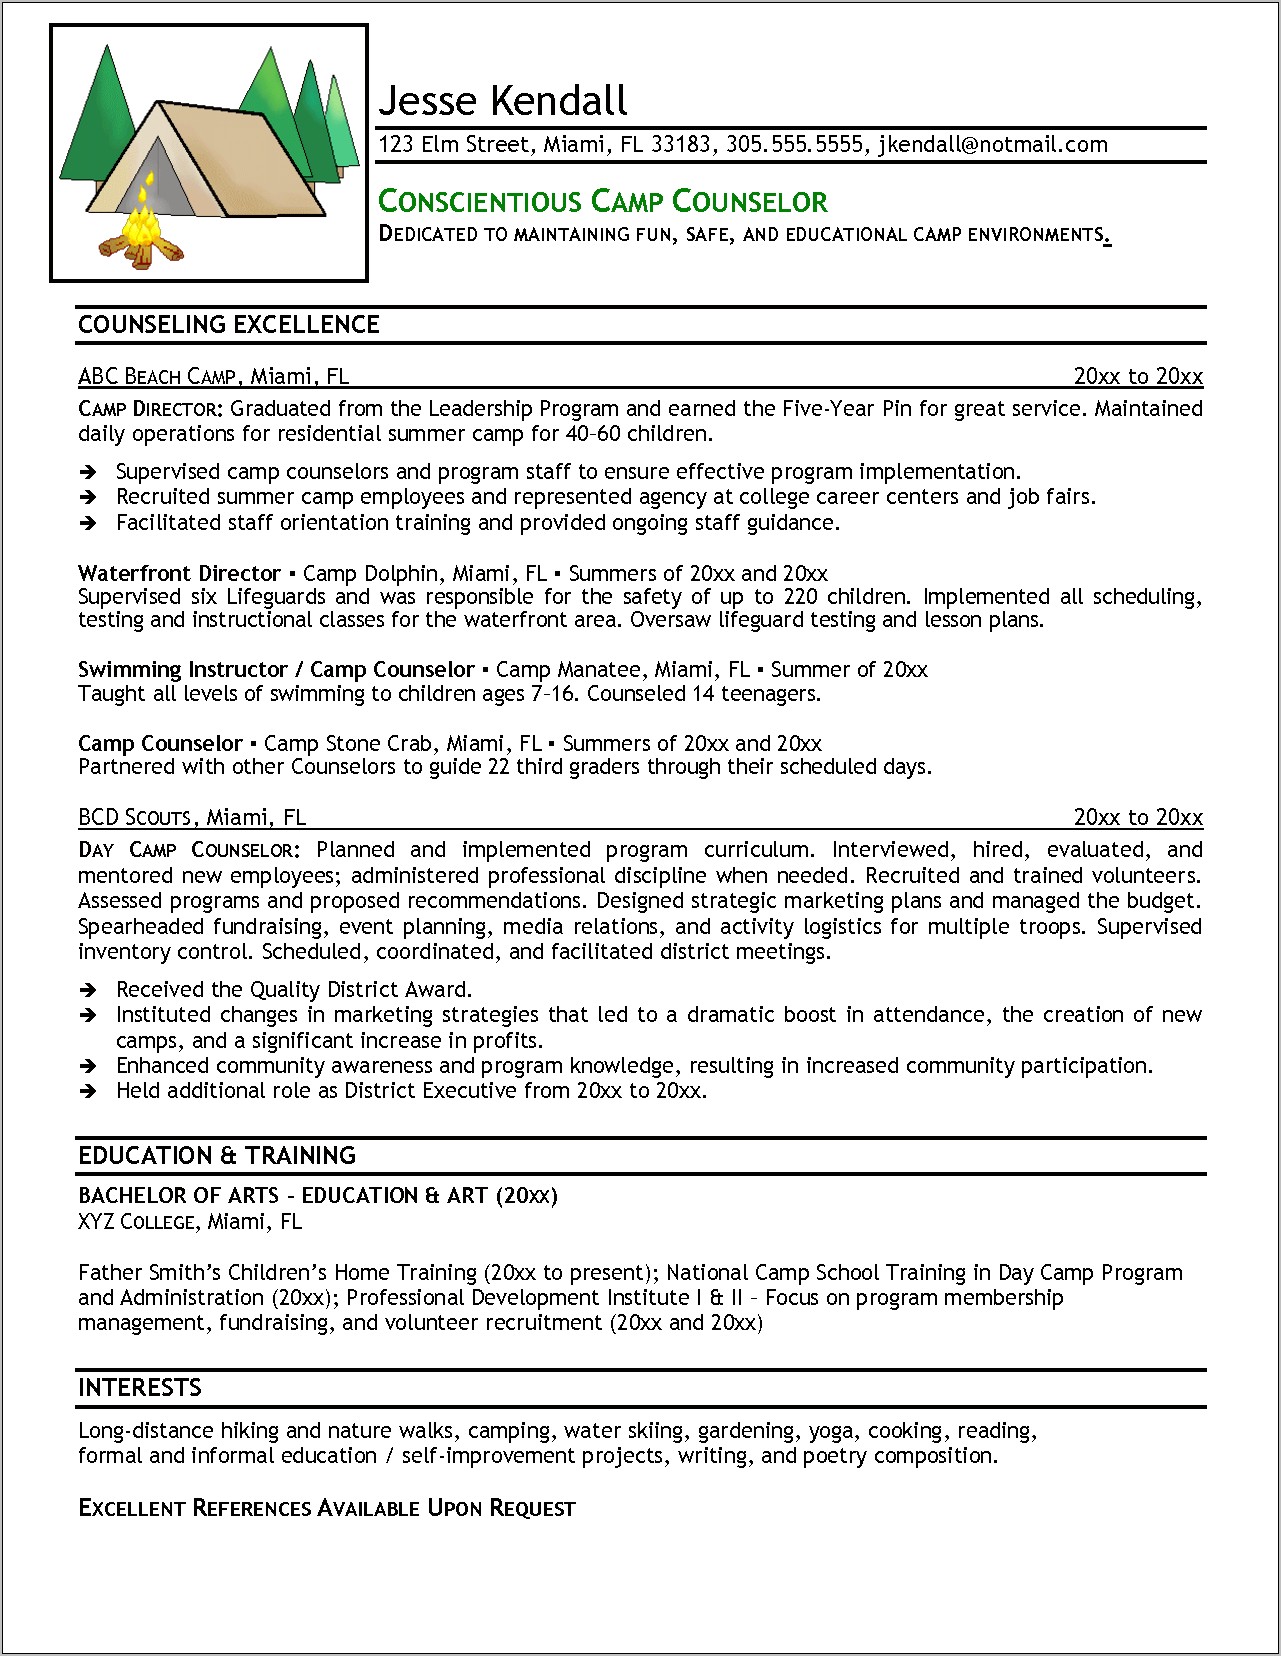 Resume Objective For Summer Camp Counselor